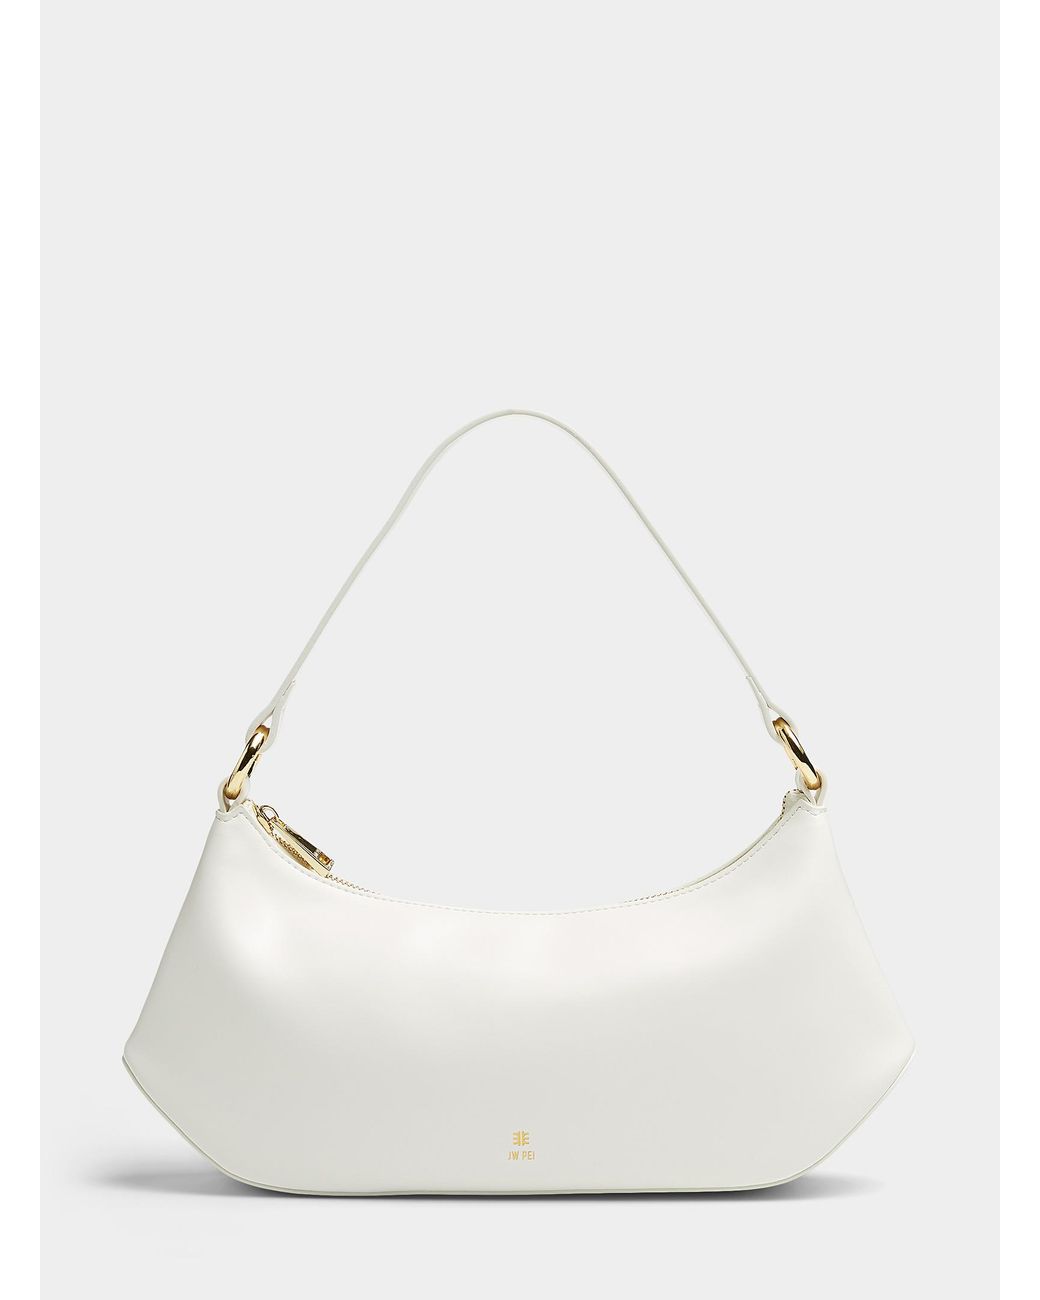 JW PEI Lily Minimalist Baguette Bag in Natural | Lyst